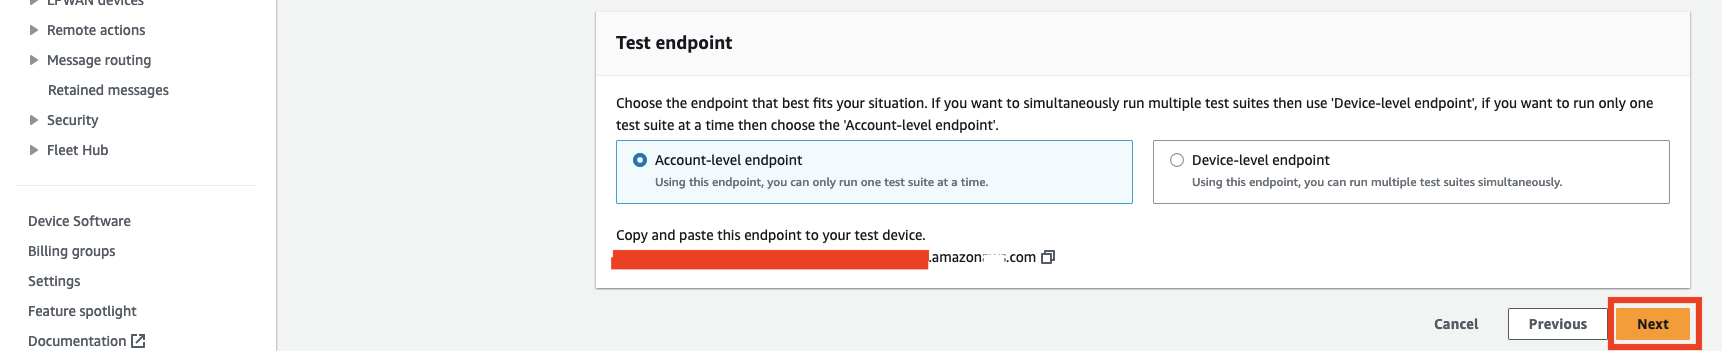 
                            Options to select Account-level or Device-level endpoint for testing, 
                                with an endpoint URL provided and Next button.
                            
                        